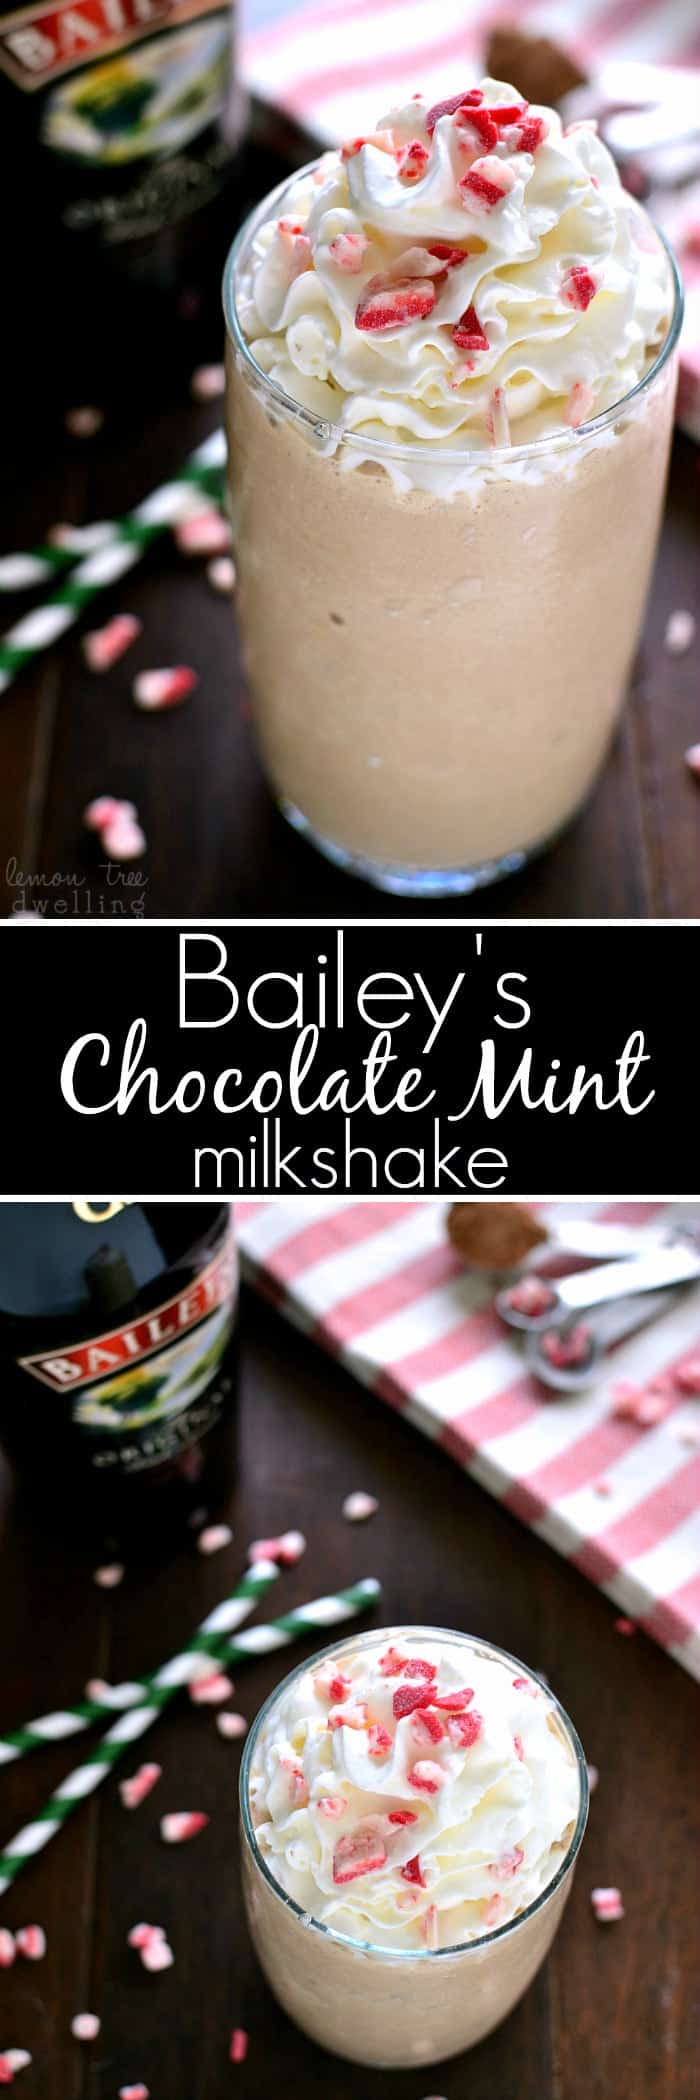 Bailey's Chocolate Mint Milkshake is everything you could want in a milkshake. This holiday drink is so rich and creamy, you won't want to stop at one!